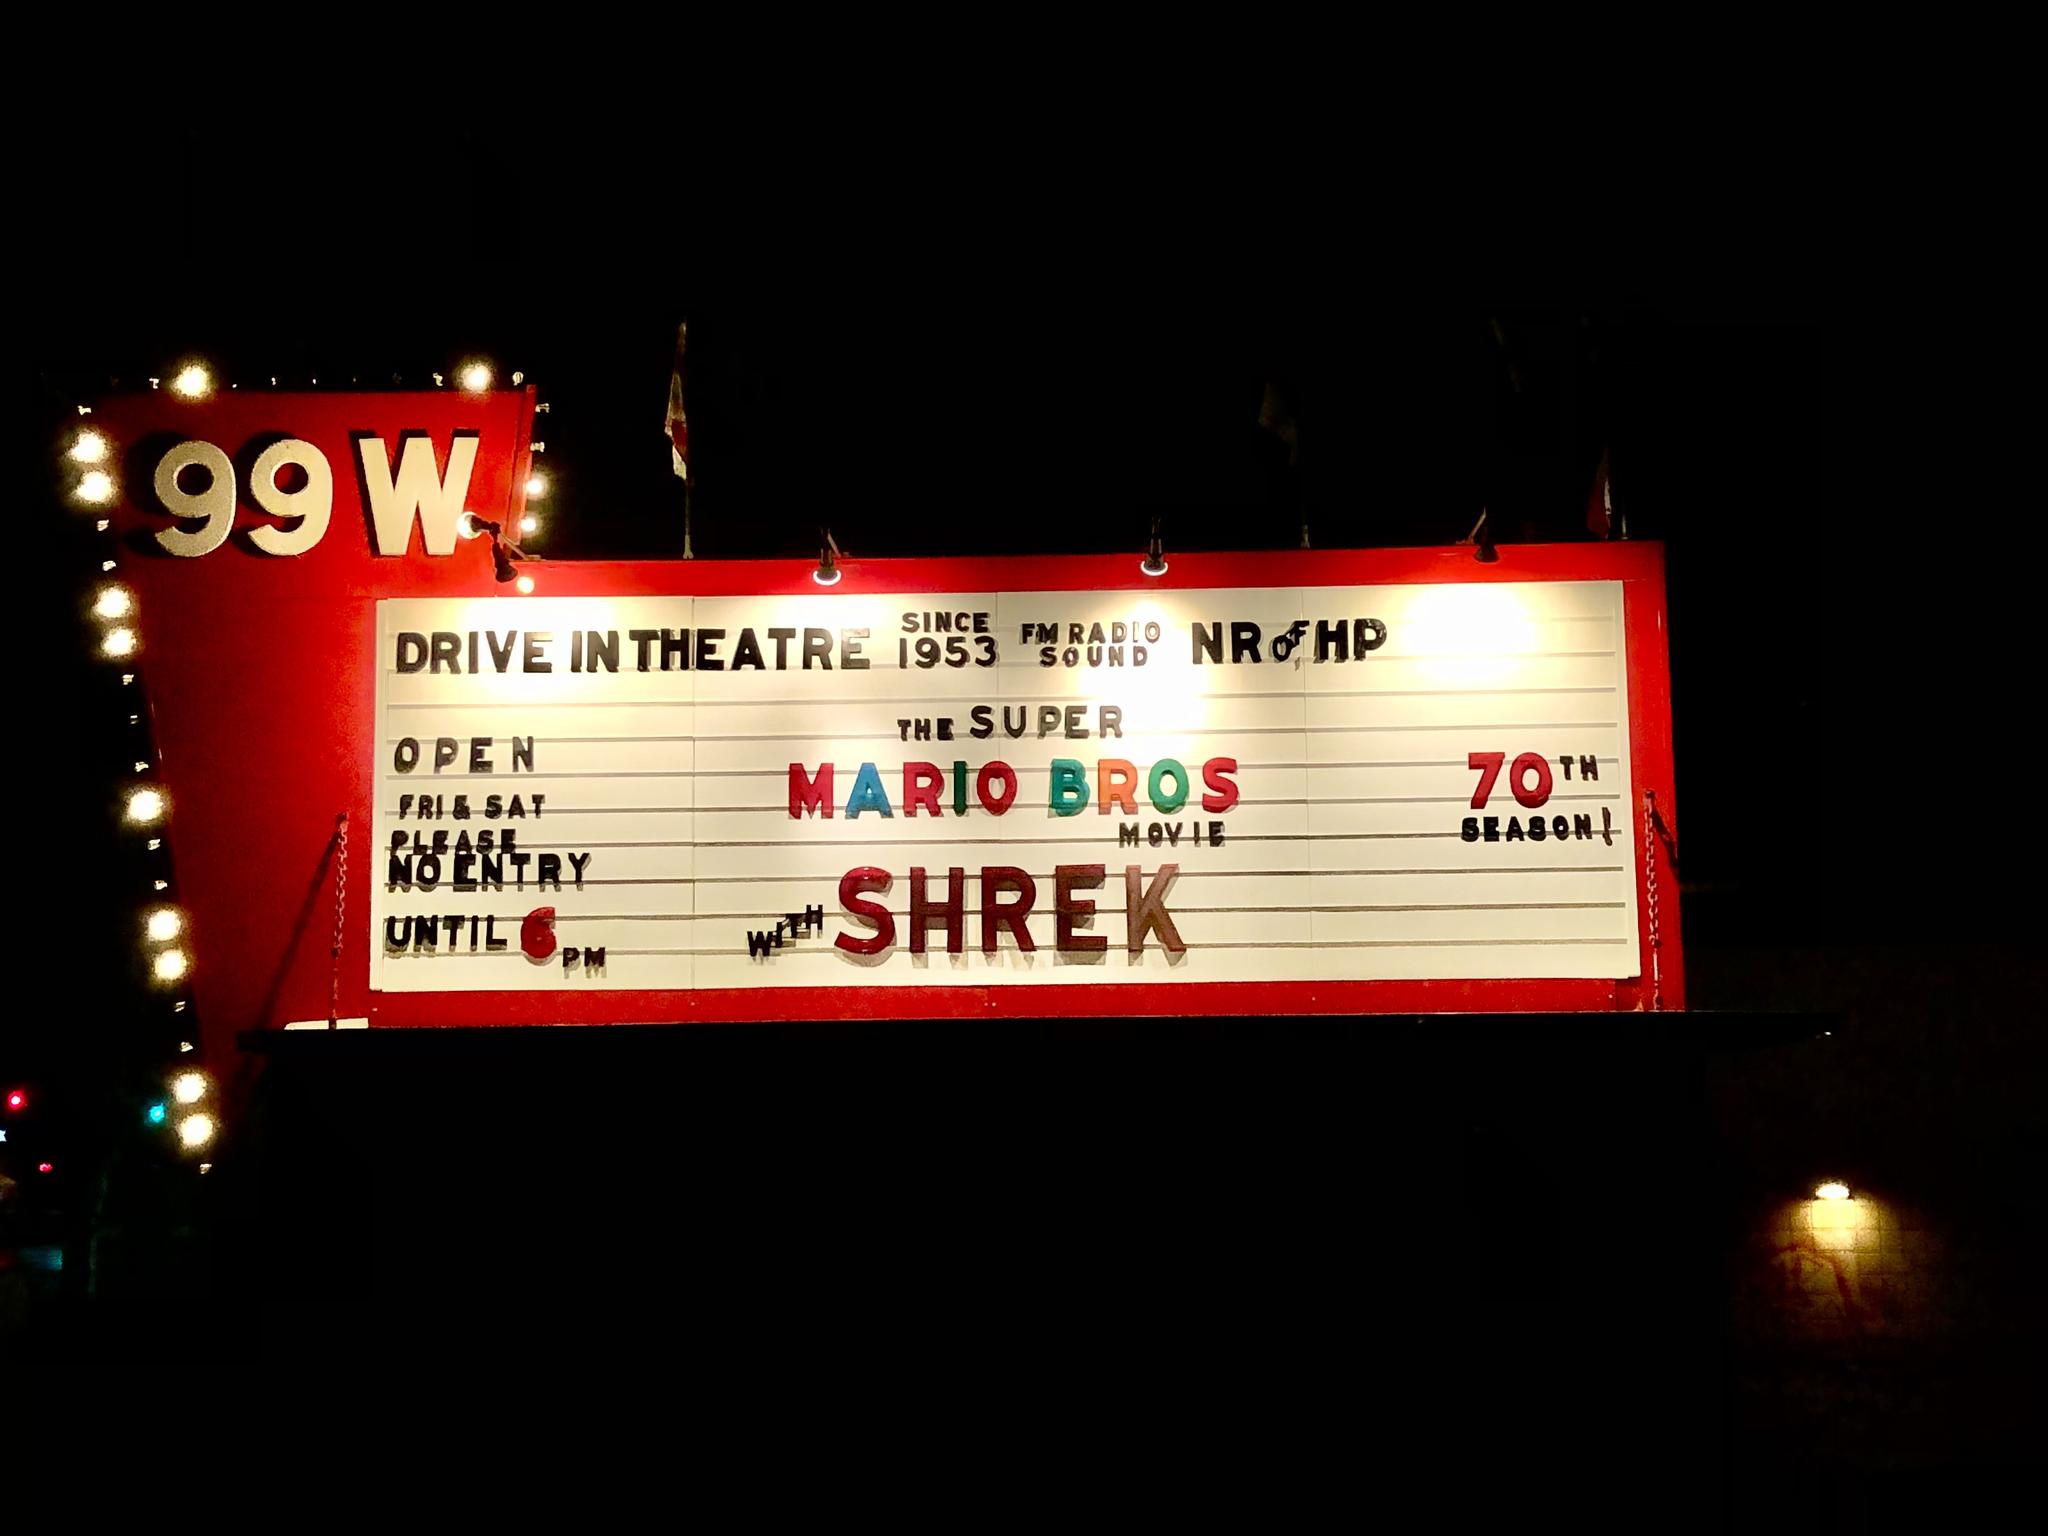 Super Mario Bros. Movie Playing Now at Newberg’s 99W Drive-In